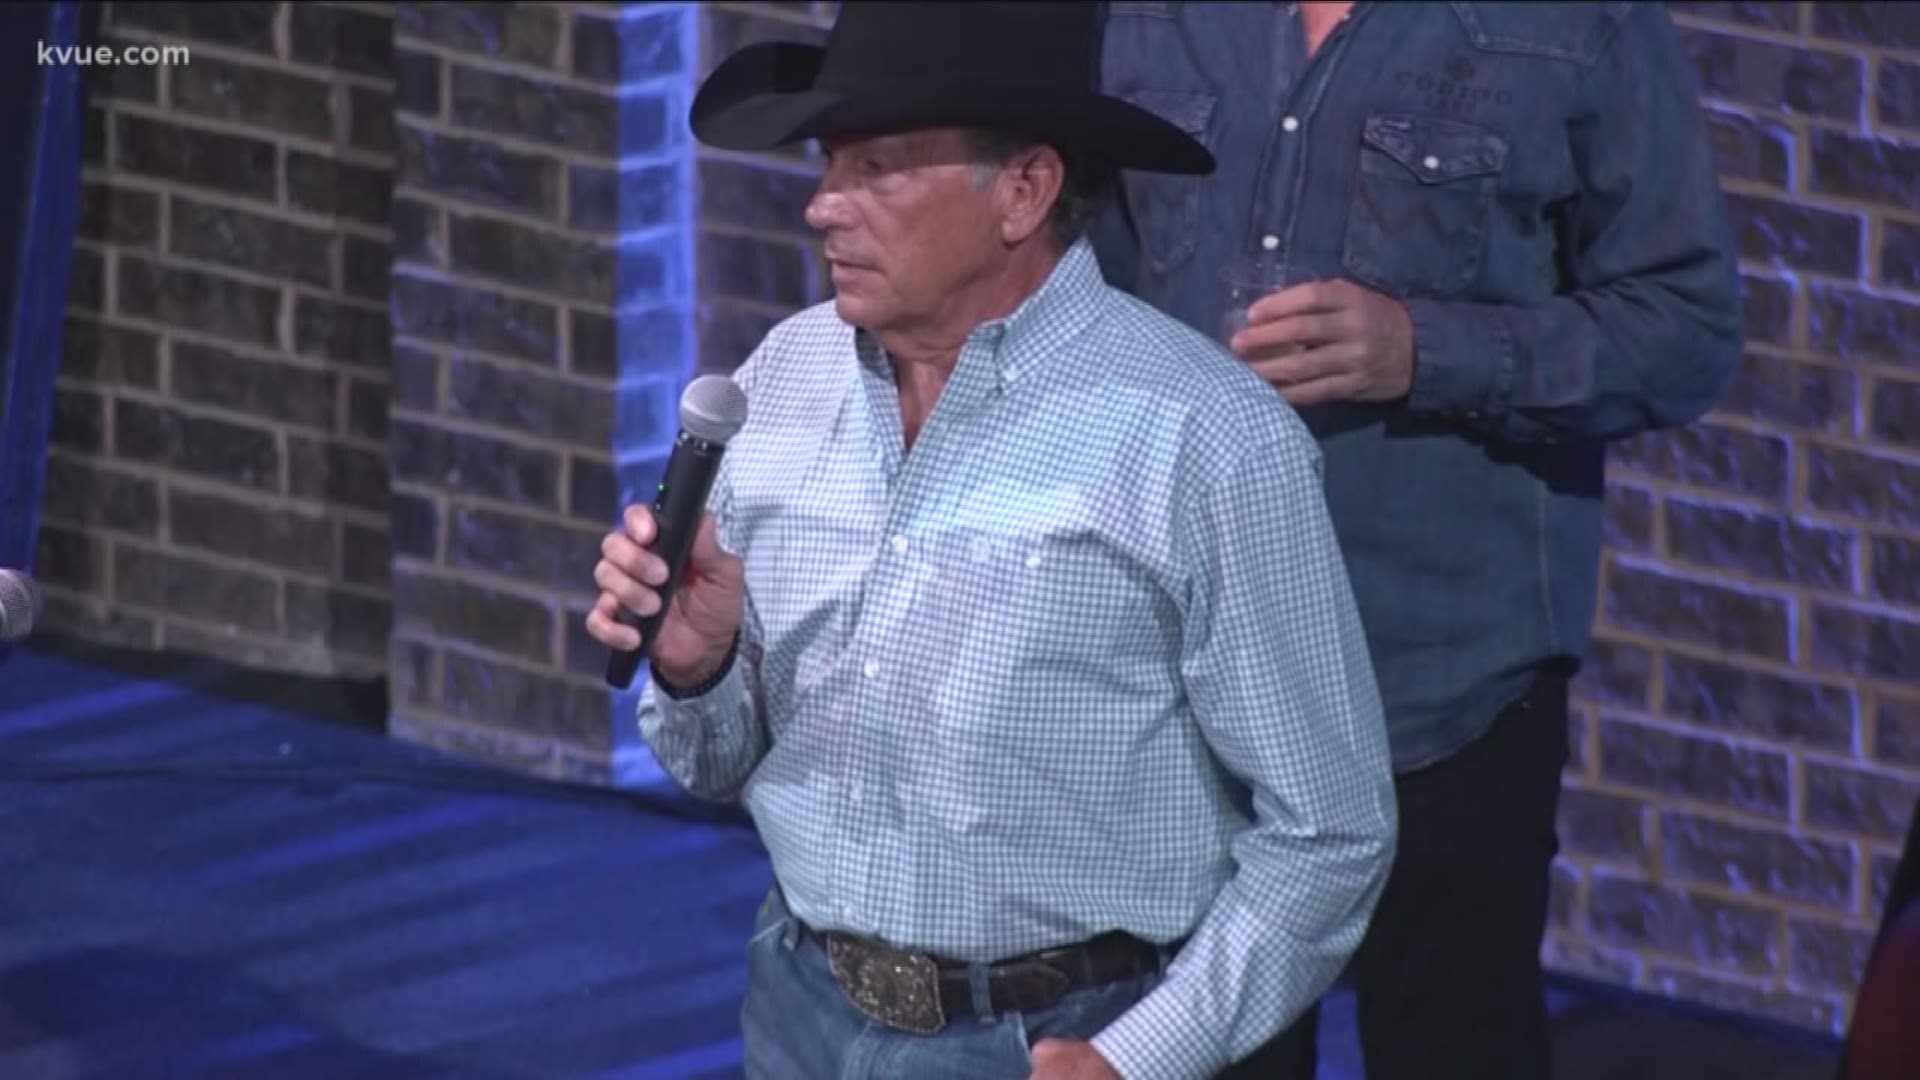 The king of country music took over a dance hall in Buda, drawing many to the new country venue.